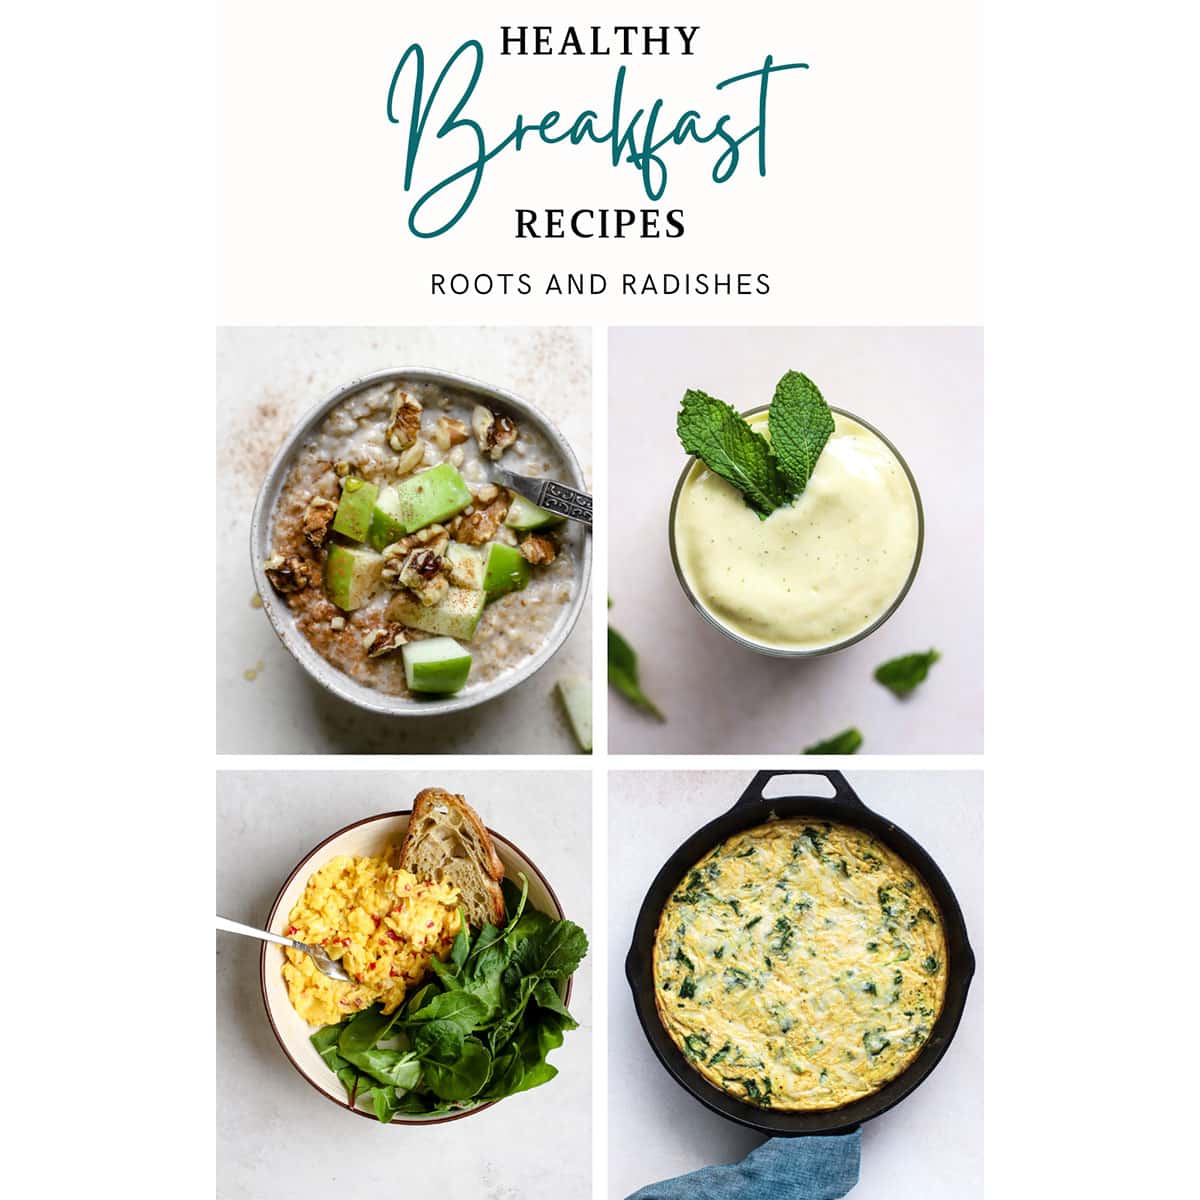 Healthy Breakfast Recipes e-Book title page featuring four breakfast recipe images: steel cut oats, mango mint smoothie, chili scrambled eggs, and kale potato and onion frittata.